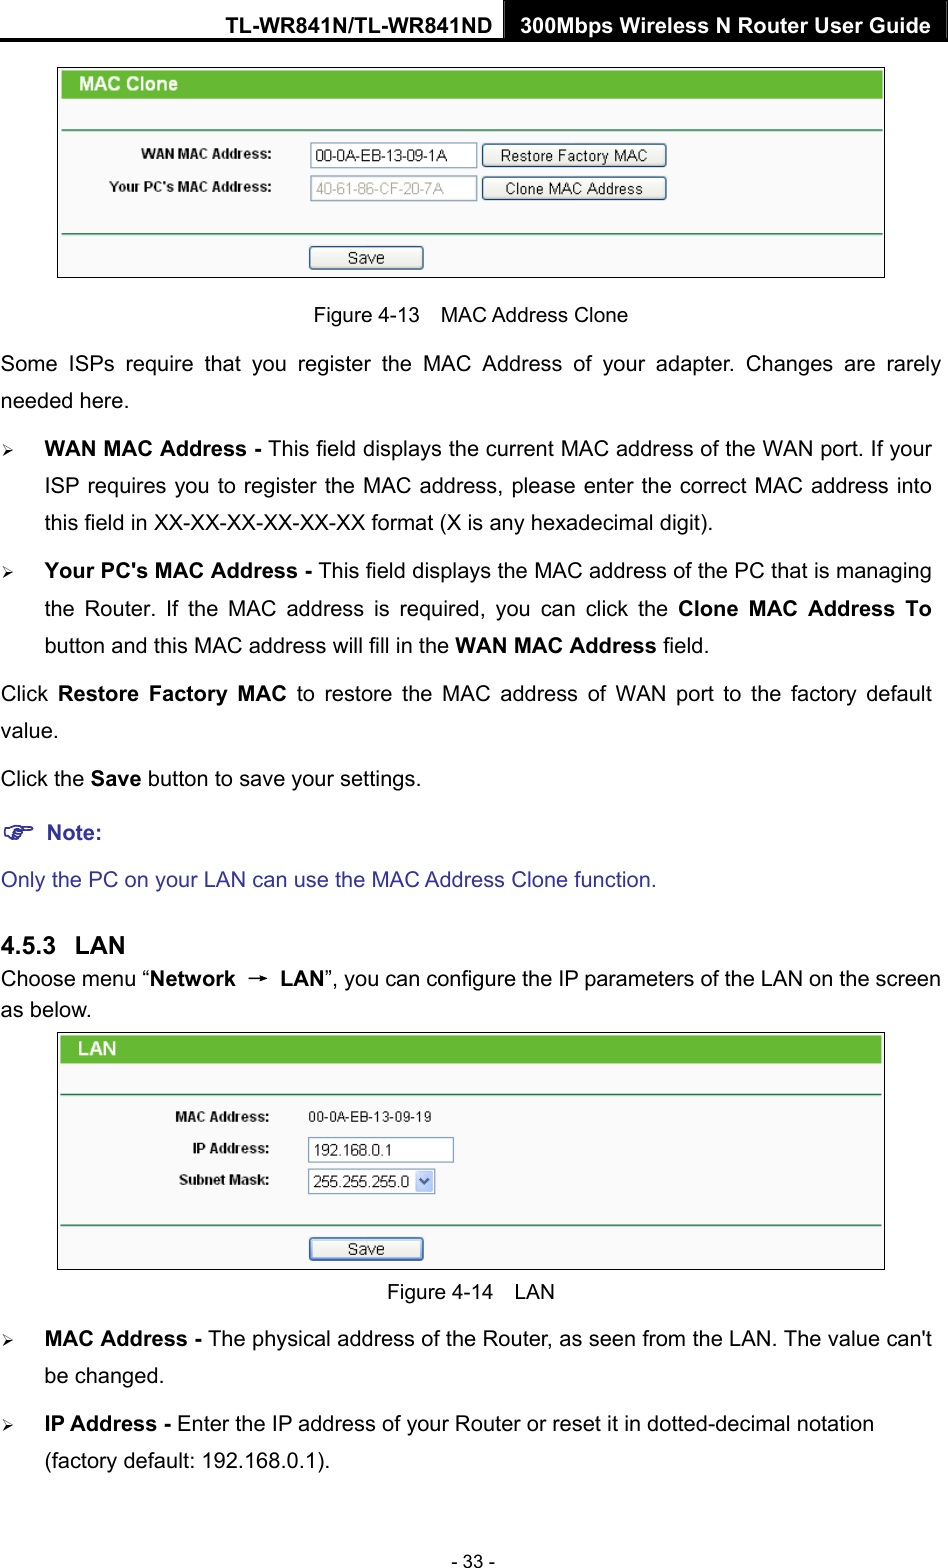 TL-WR841N/TL-WR841ND 300Mbps Wireless N Router User Guide - 33 -  Figure 4-13  MAC Address Clone Some ISPs require that you register the MAC Address of your adapter. Changes are rarely needed here. ¾ WAN MAC Address - This field displays the current MAC address of the WAN port. If your ISP requires you to register the MAC address, please enter the correct MAC address into this field in XX-XX-XX-XX-XX-XX format (X is any hexadecimal digit).   ¾ Your PC&apos;s MAC Address - This field displays the MAC address of the PC that is managing the Router. If the MAC address is required, you can click the Clone MAC Address To button and this MAC address will fill in the WAN MAC Address field. Click  Restore Factory MAC to restore the MAC address of WAN port to the factory default value. Click the Save button to save your settings. ) Note:  Only the PC on your LAN can use the MAC Address Clone function. 4.5.3  LAN Choose menu “Network  → LAN”, you can configure the IP parameters of the LAN on the screen as below.  Figure 4-14  LAN ¾ MAC Address - The physical address of the Router, as seen from the LAN. The value can&apos;t be changed. ¾ IP Address - Enter the IP address of your Router or reset it in dotted-decimal notation (factory default: 192.168.0.1). 